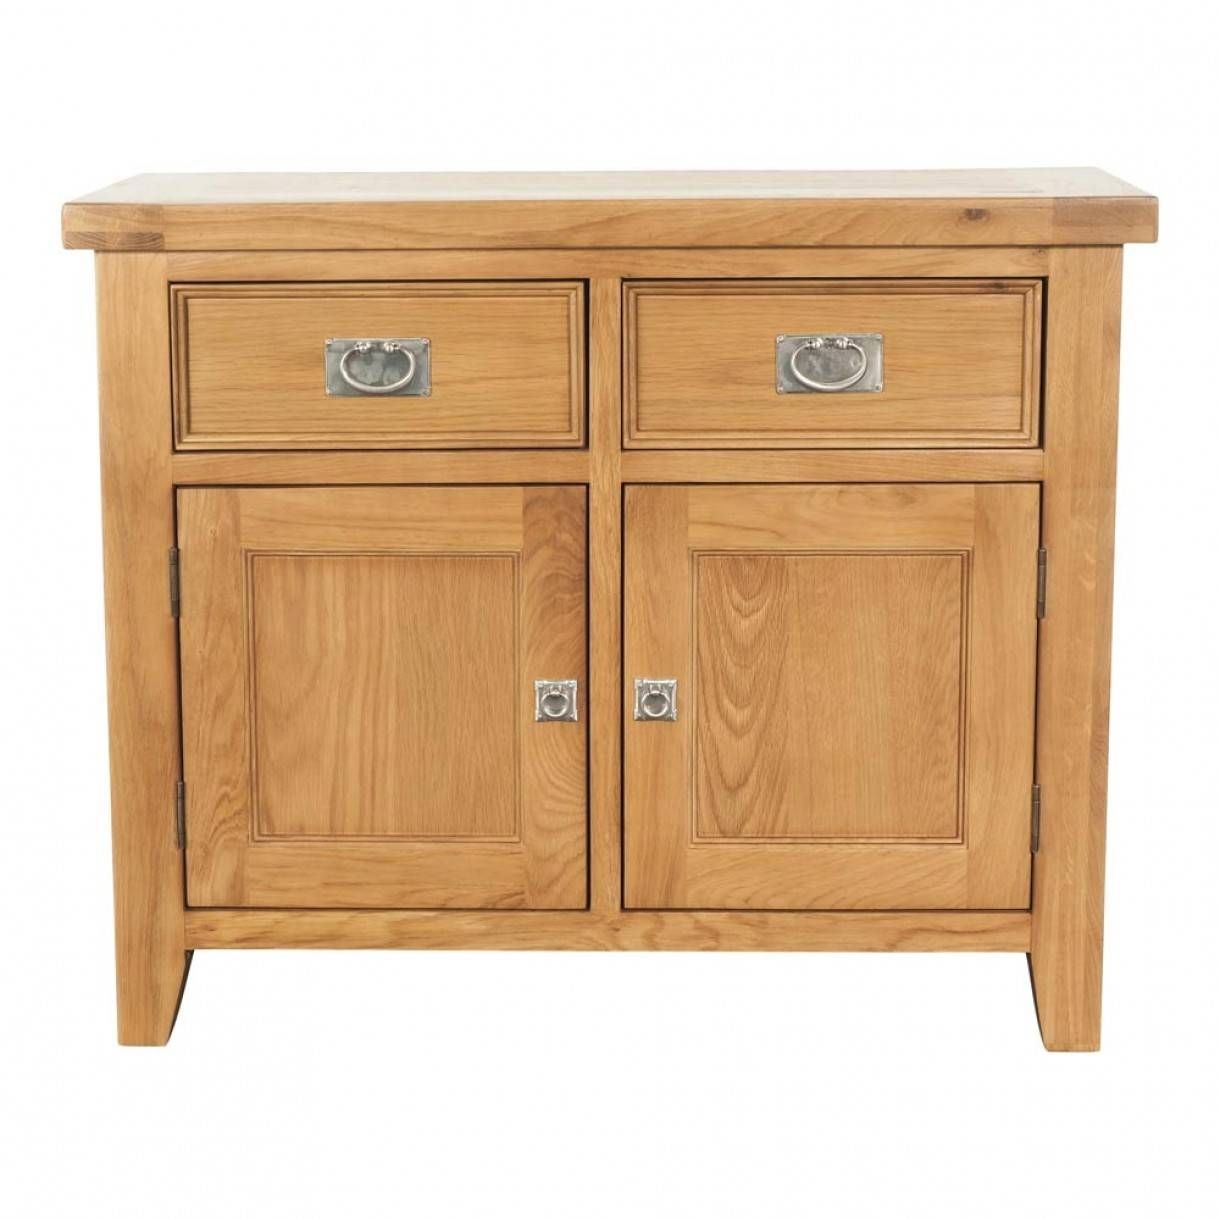 Buy Buffets And Sideboards Online | Dining | Early Settler Furniture Within Small Sideboard Cabinets (View 7 of 15)